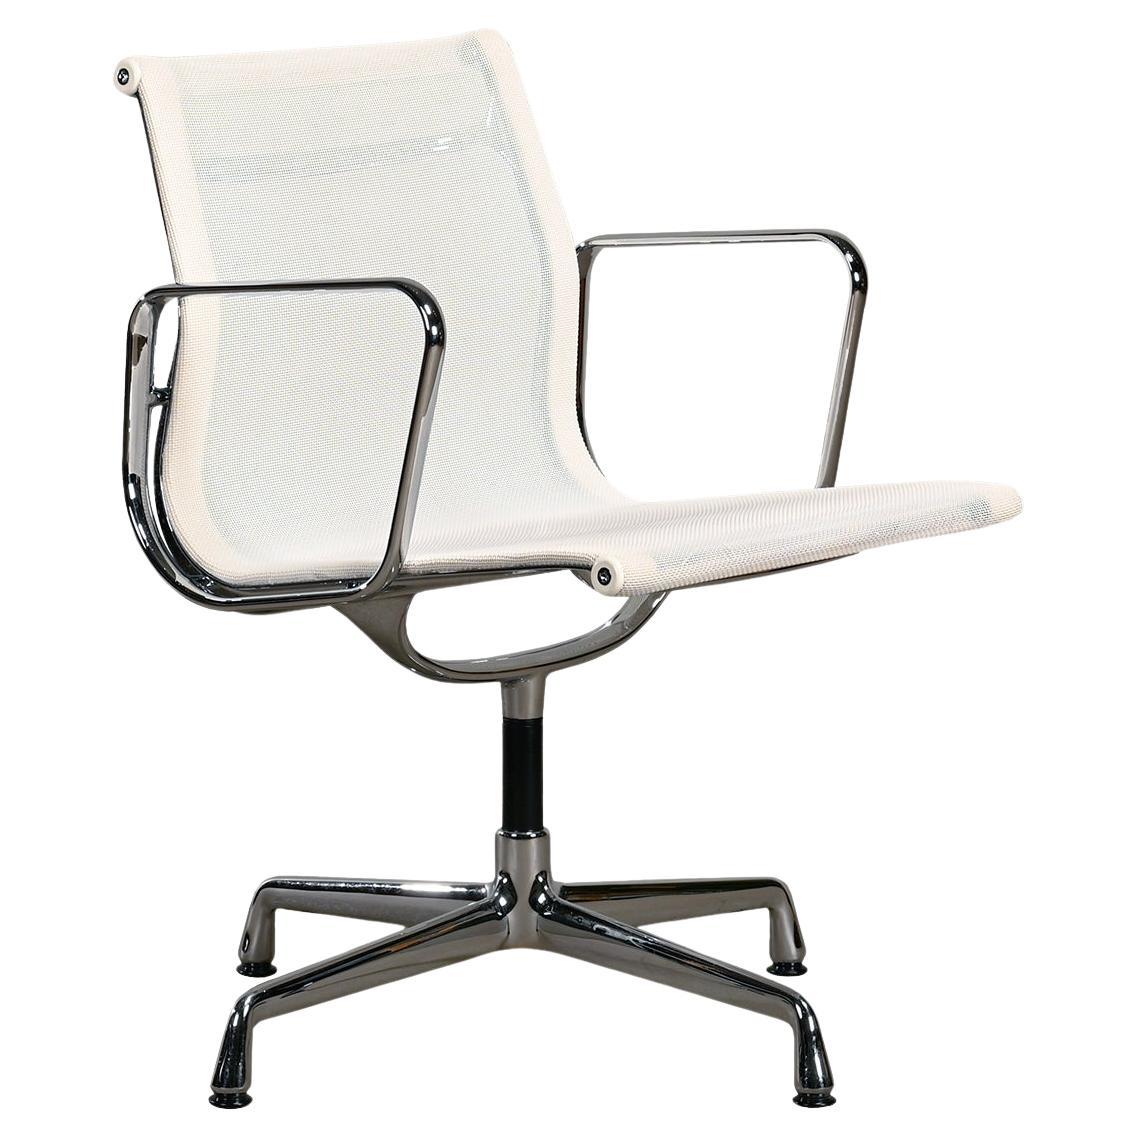 Multiple Eames Aluminum Group EA108 Dining Chairs in White Netweave Mesh, Vitra